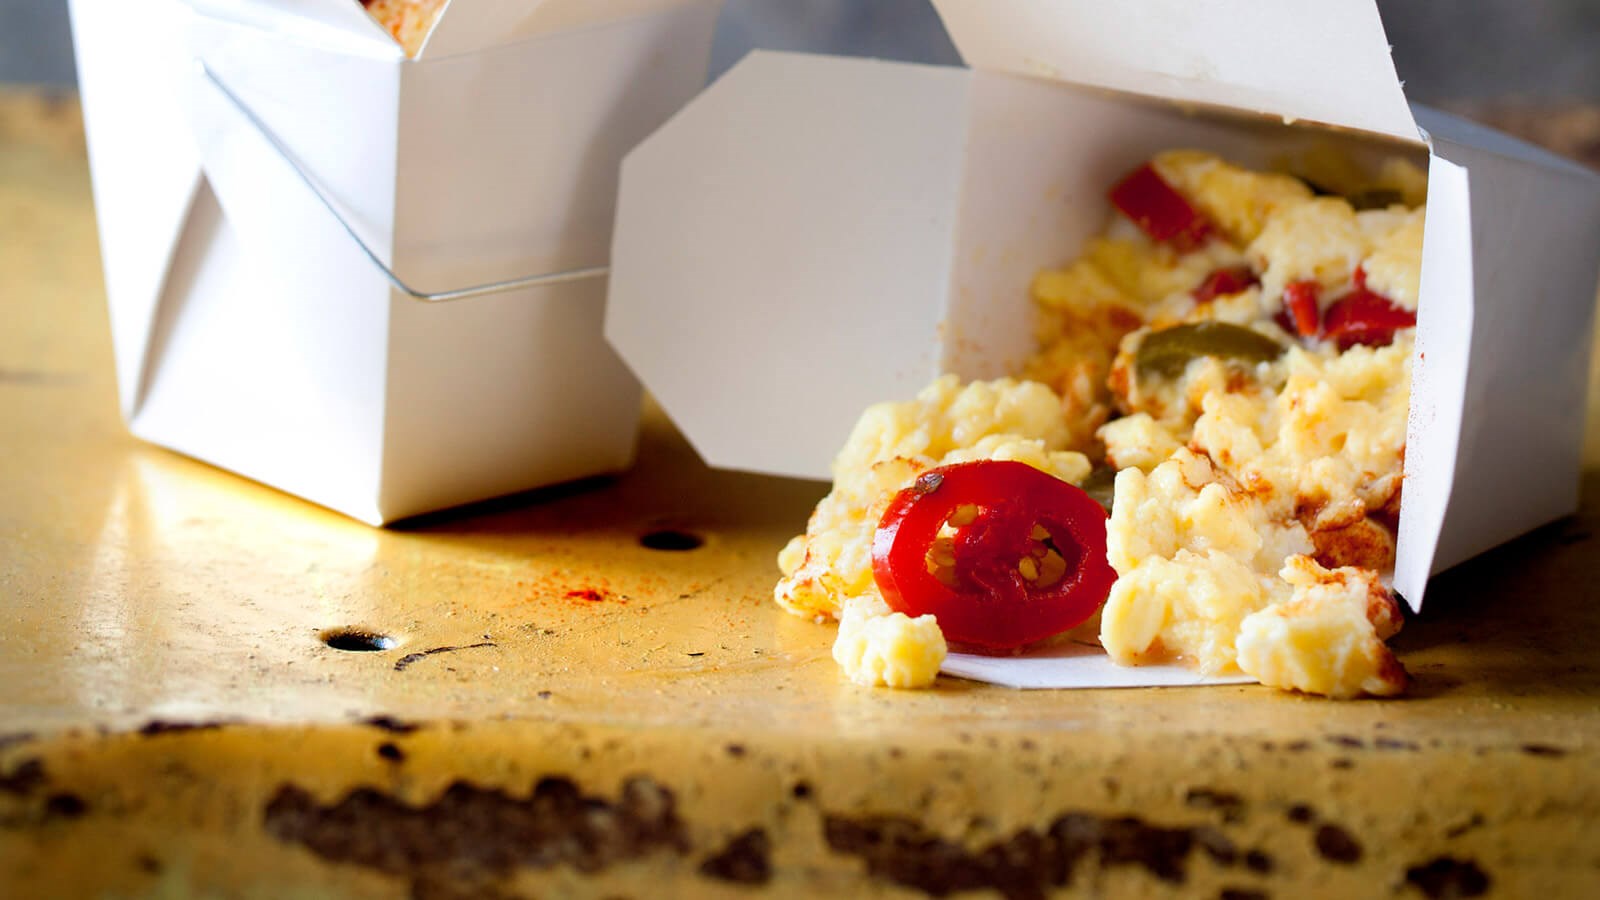 Scrambled eggs with jalapeño in take away boxes